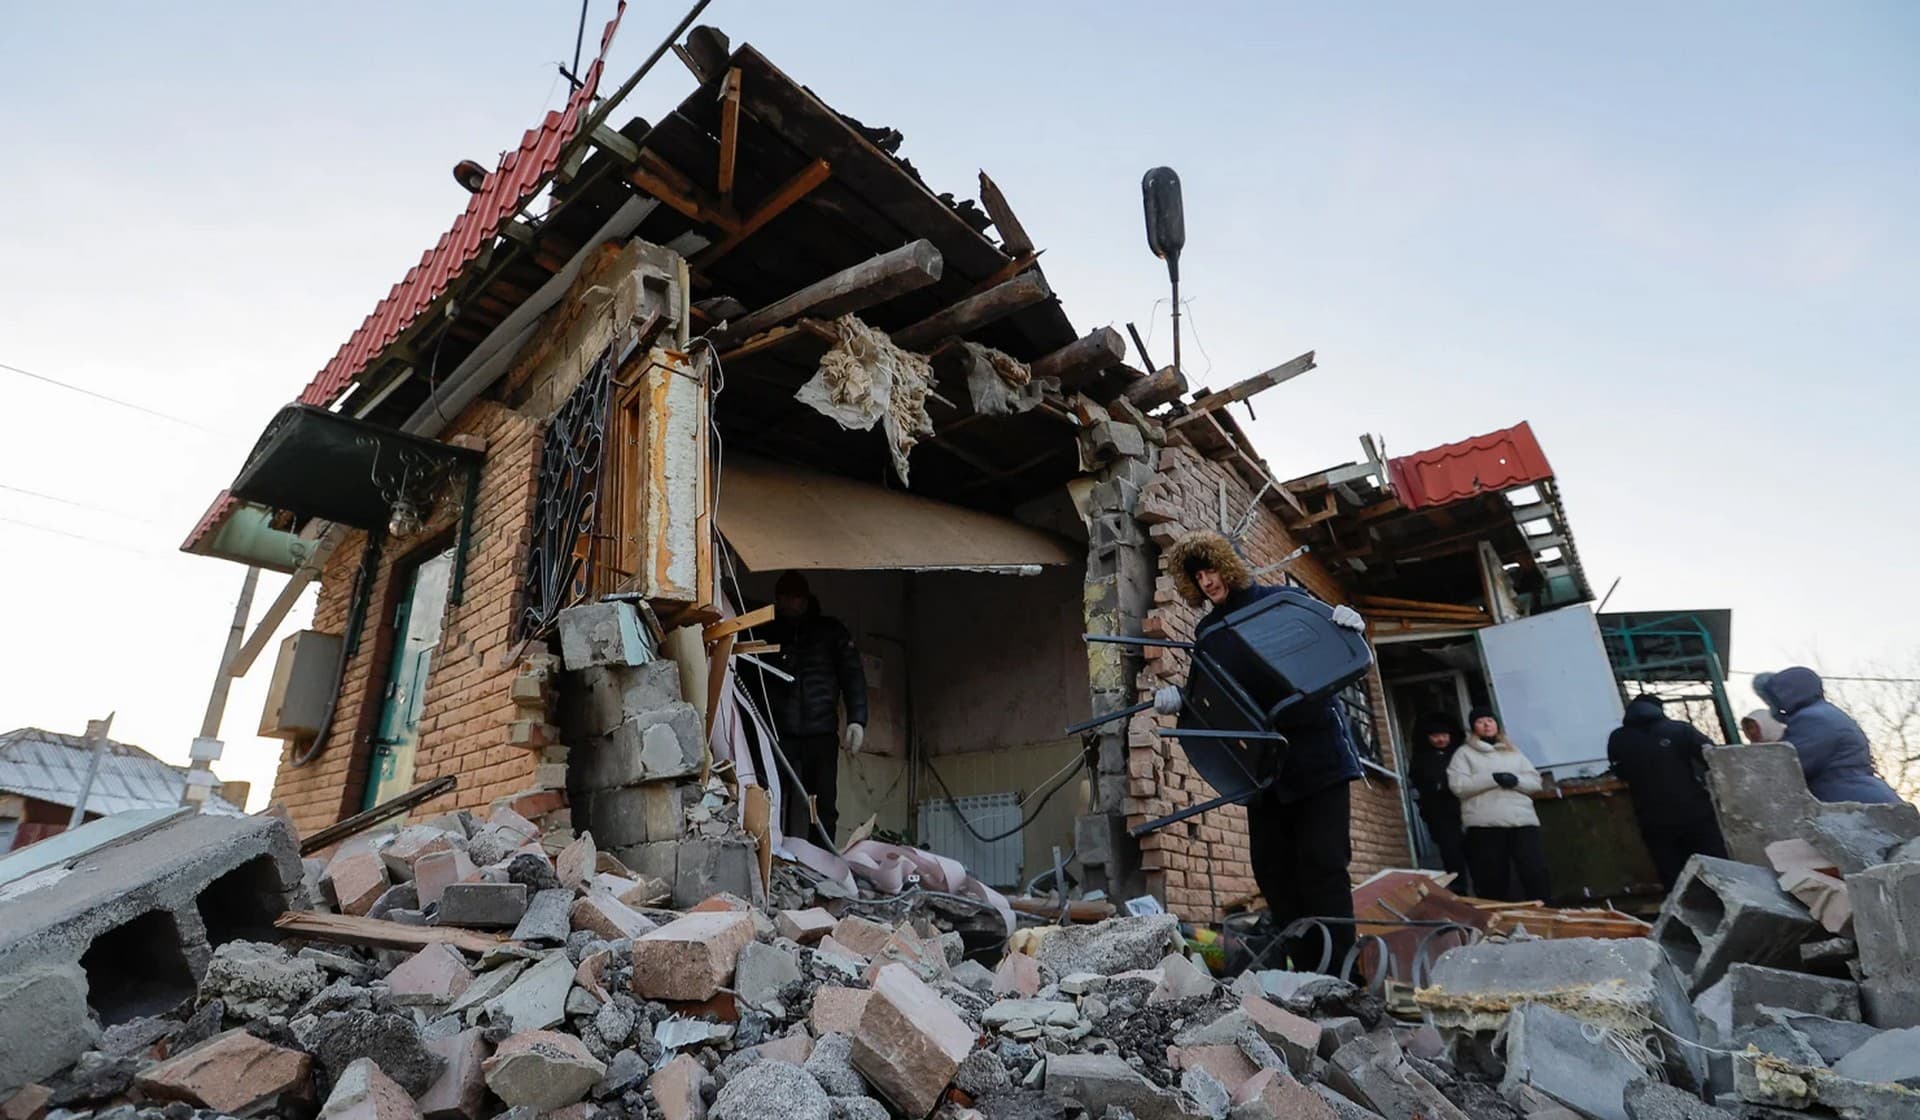 Local residents remove debris and carry belongings out of a shop destroyed in recent shelling in Donetsk